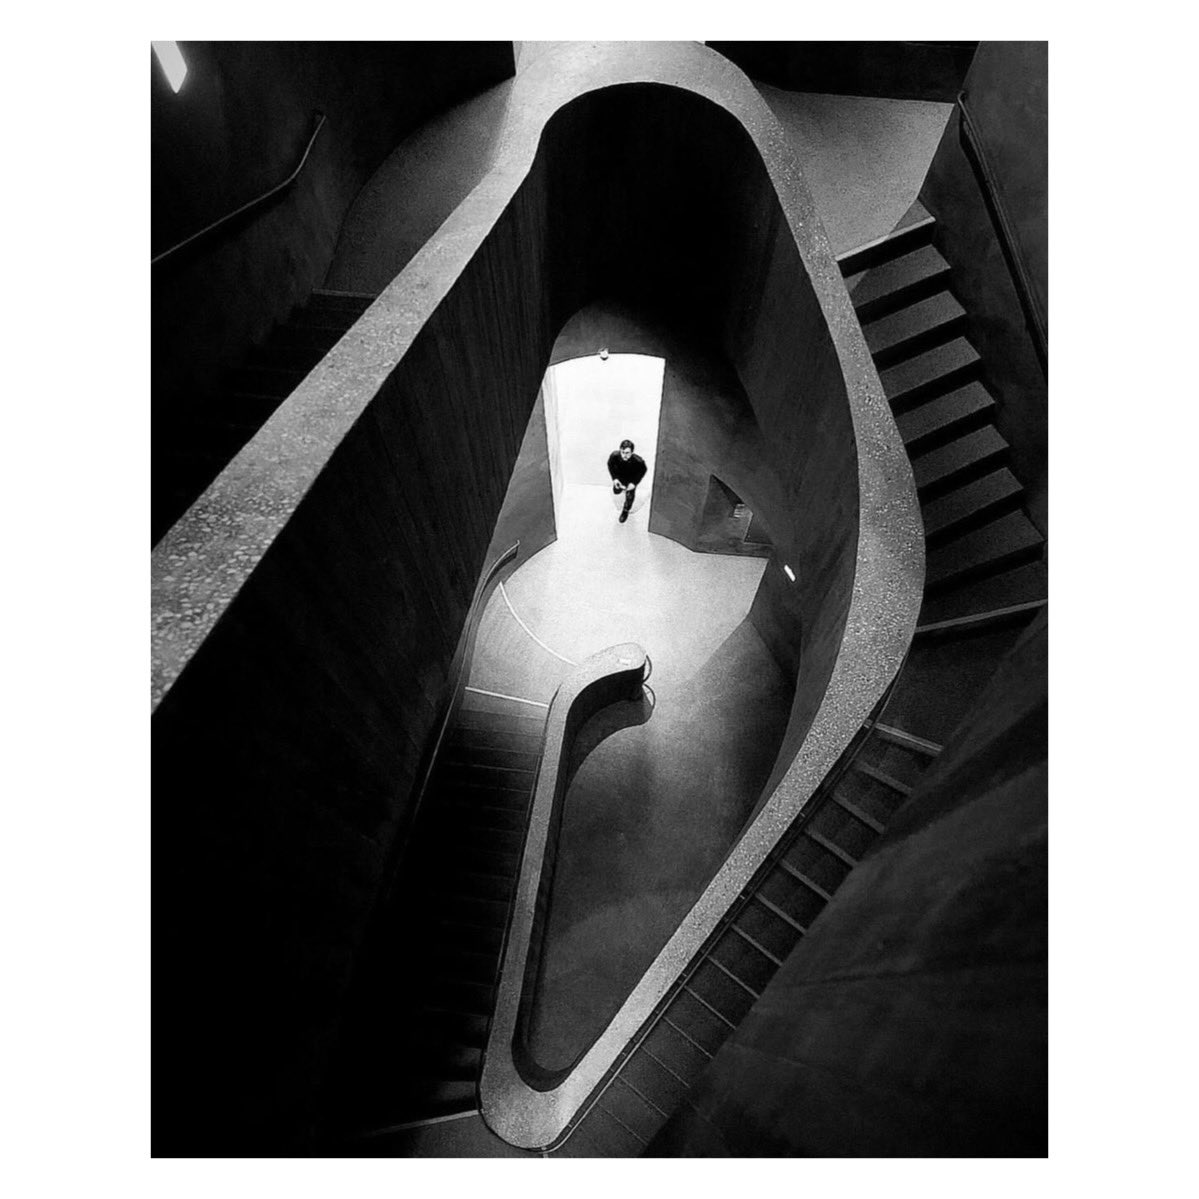 This Street Shot was taken by @michaelt.bw
We want to see all genres of Street Shots. Please continue to use #ssicollaborative and follow @streetshotsinternational for the chance to be featured.
#StreetPhotography #street #monochrome #filmnoir #staircase #bnw #Duisberg